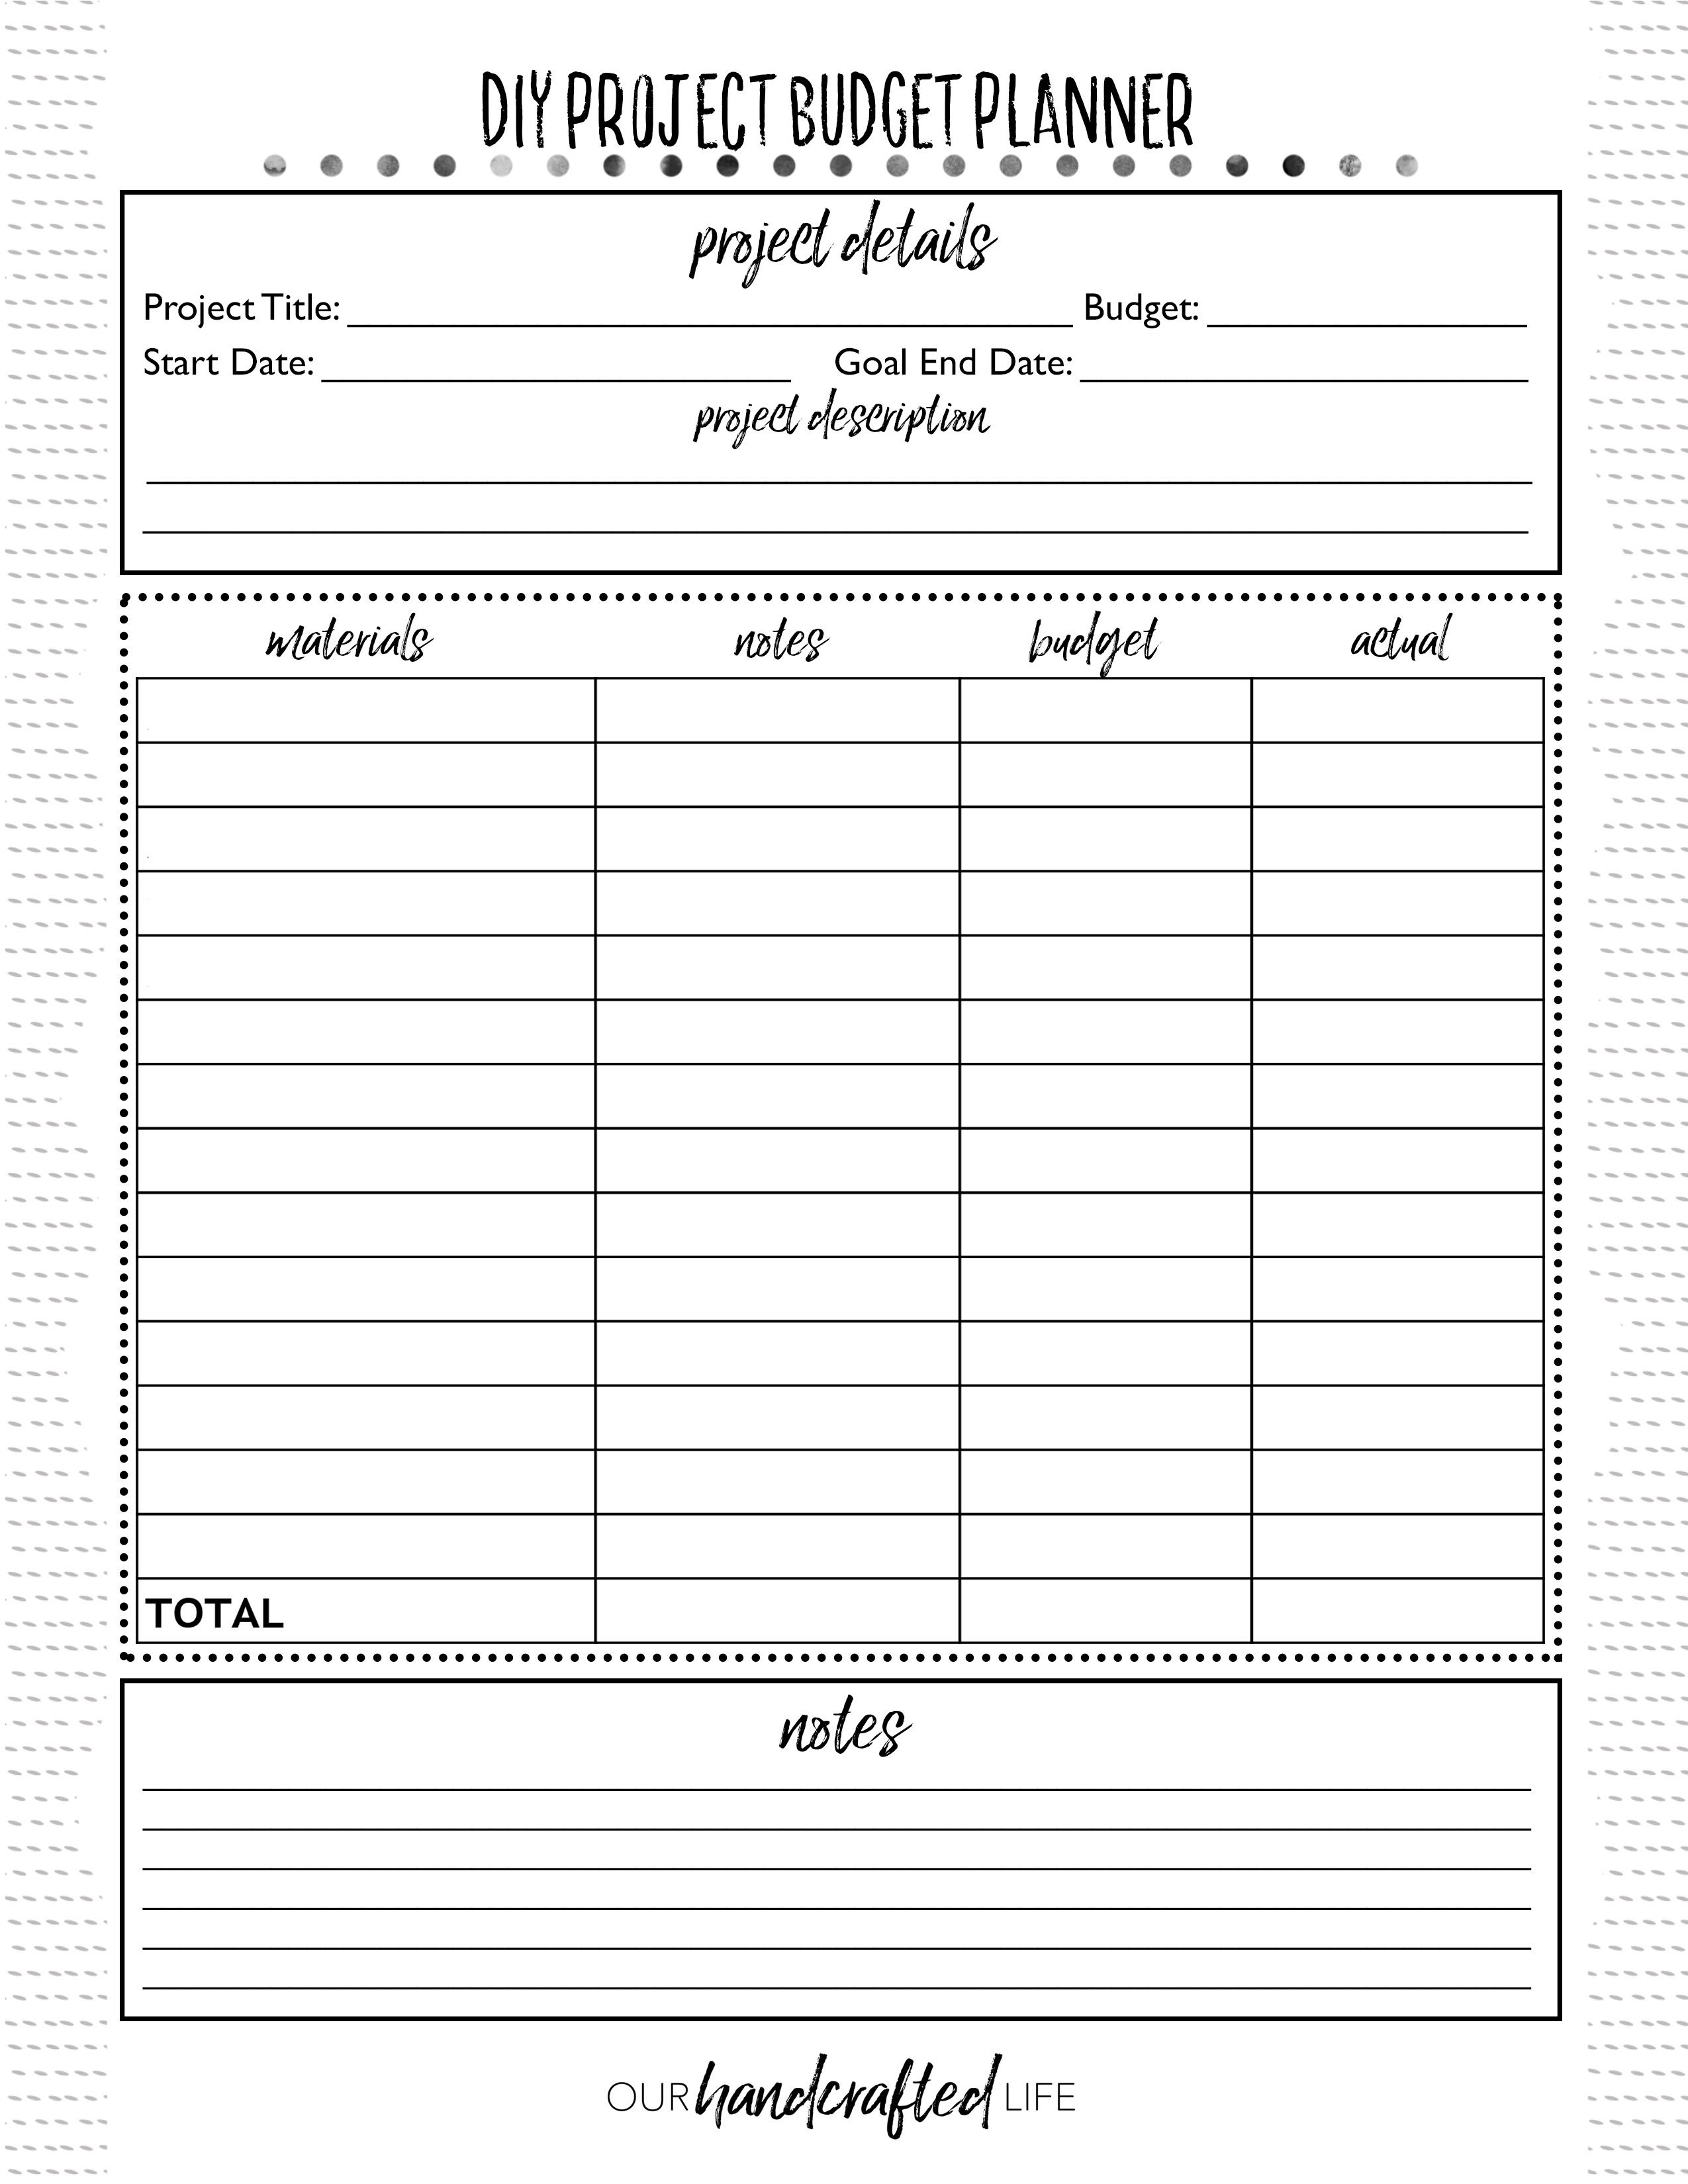 printable project planner